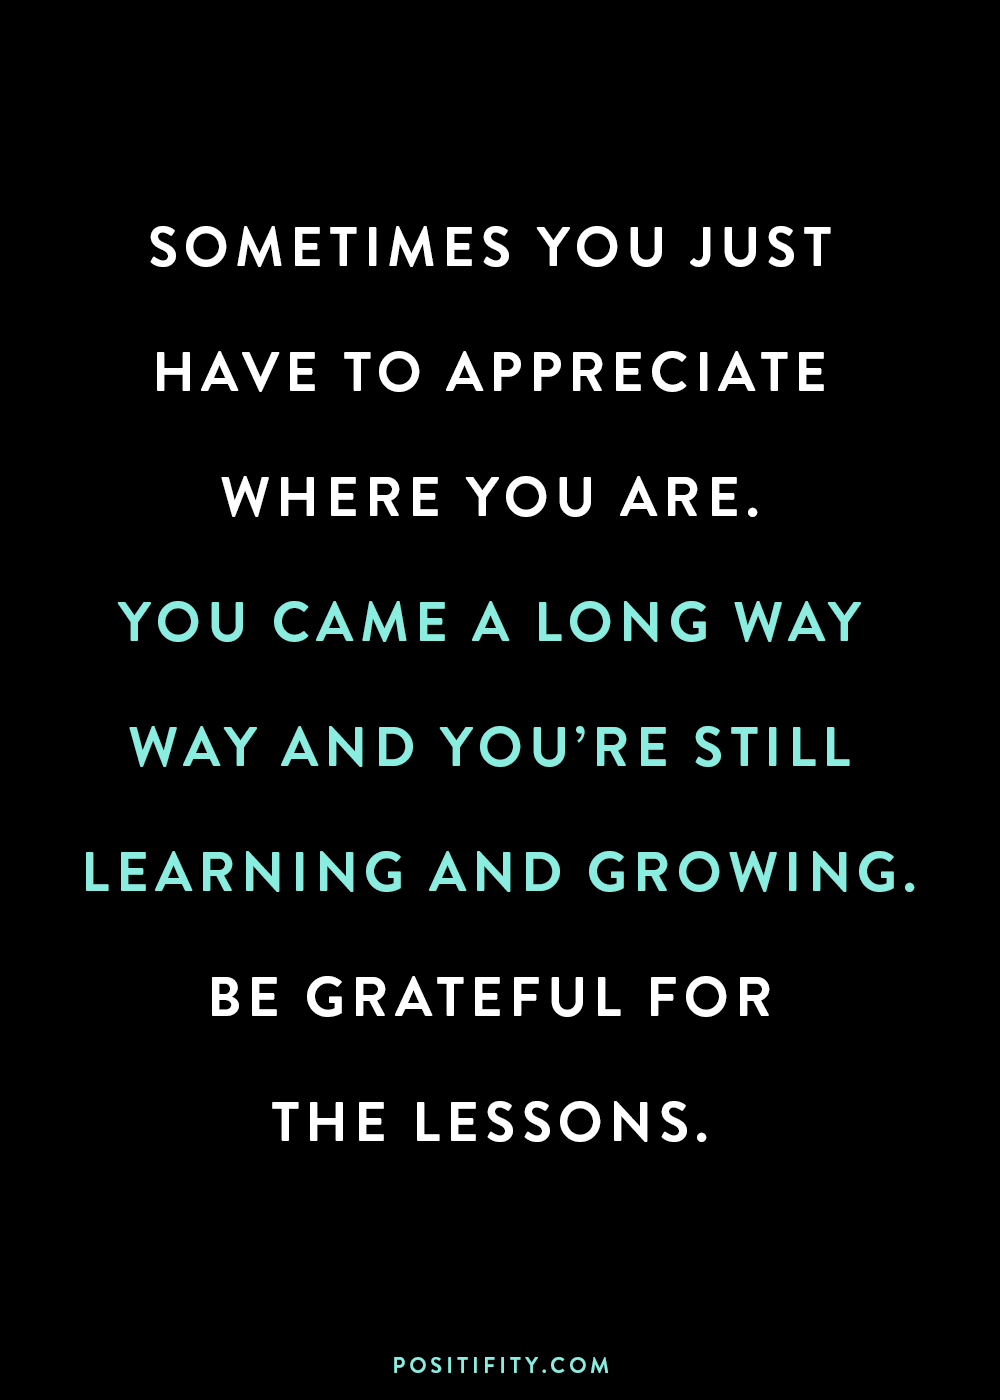 “Sometimes you just have to appreciate where you are. You came a long way and you’re still learning and growing. Be grateful for the lessons.”